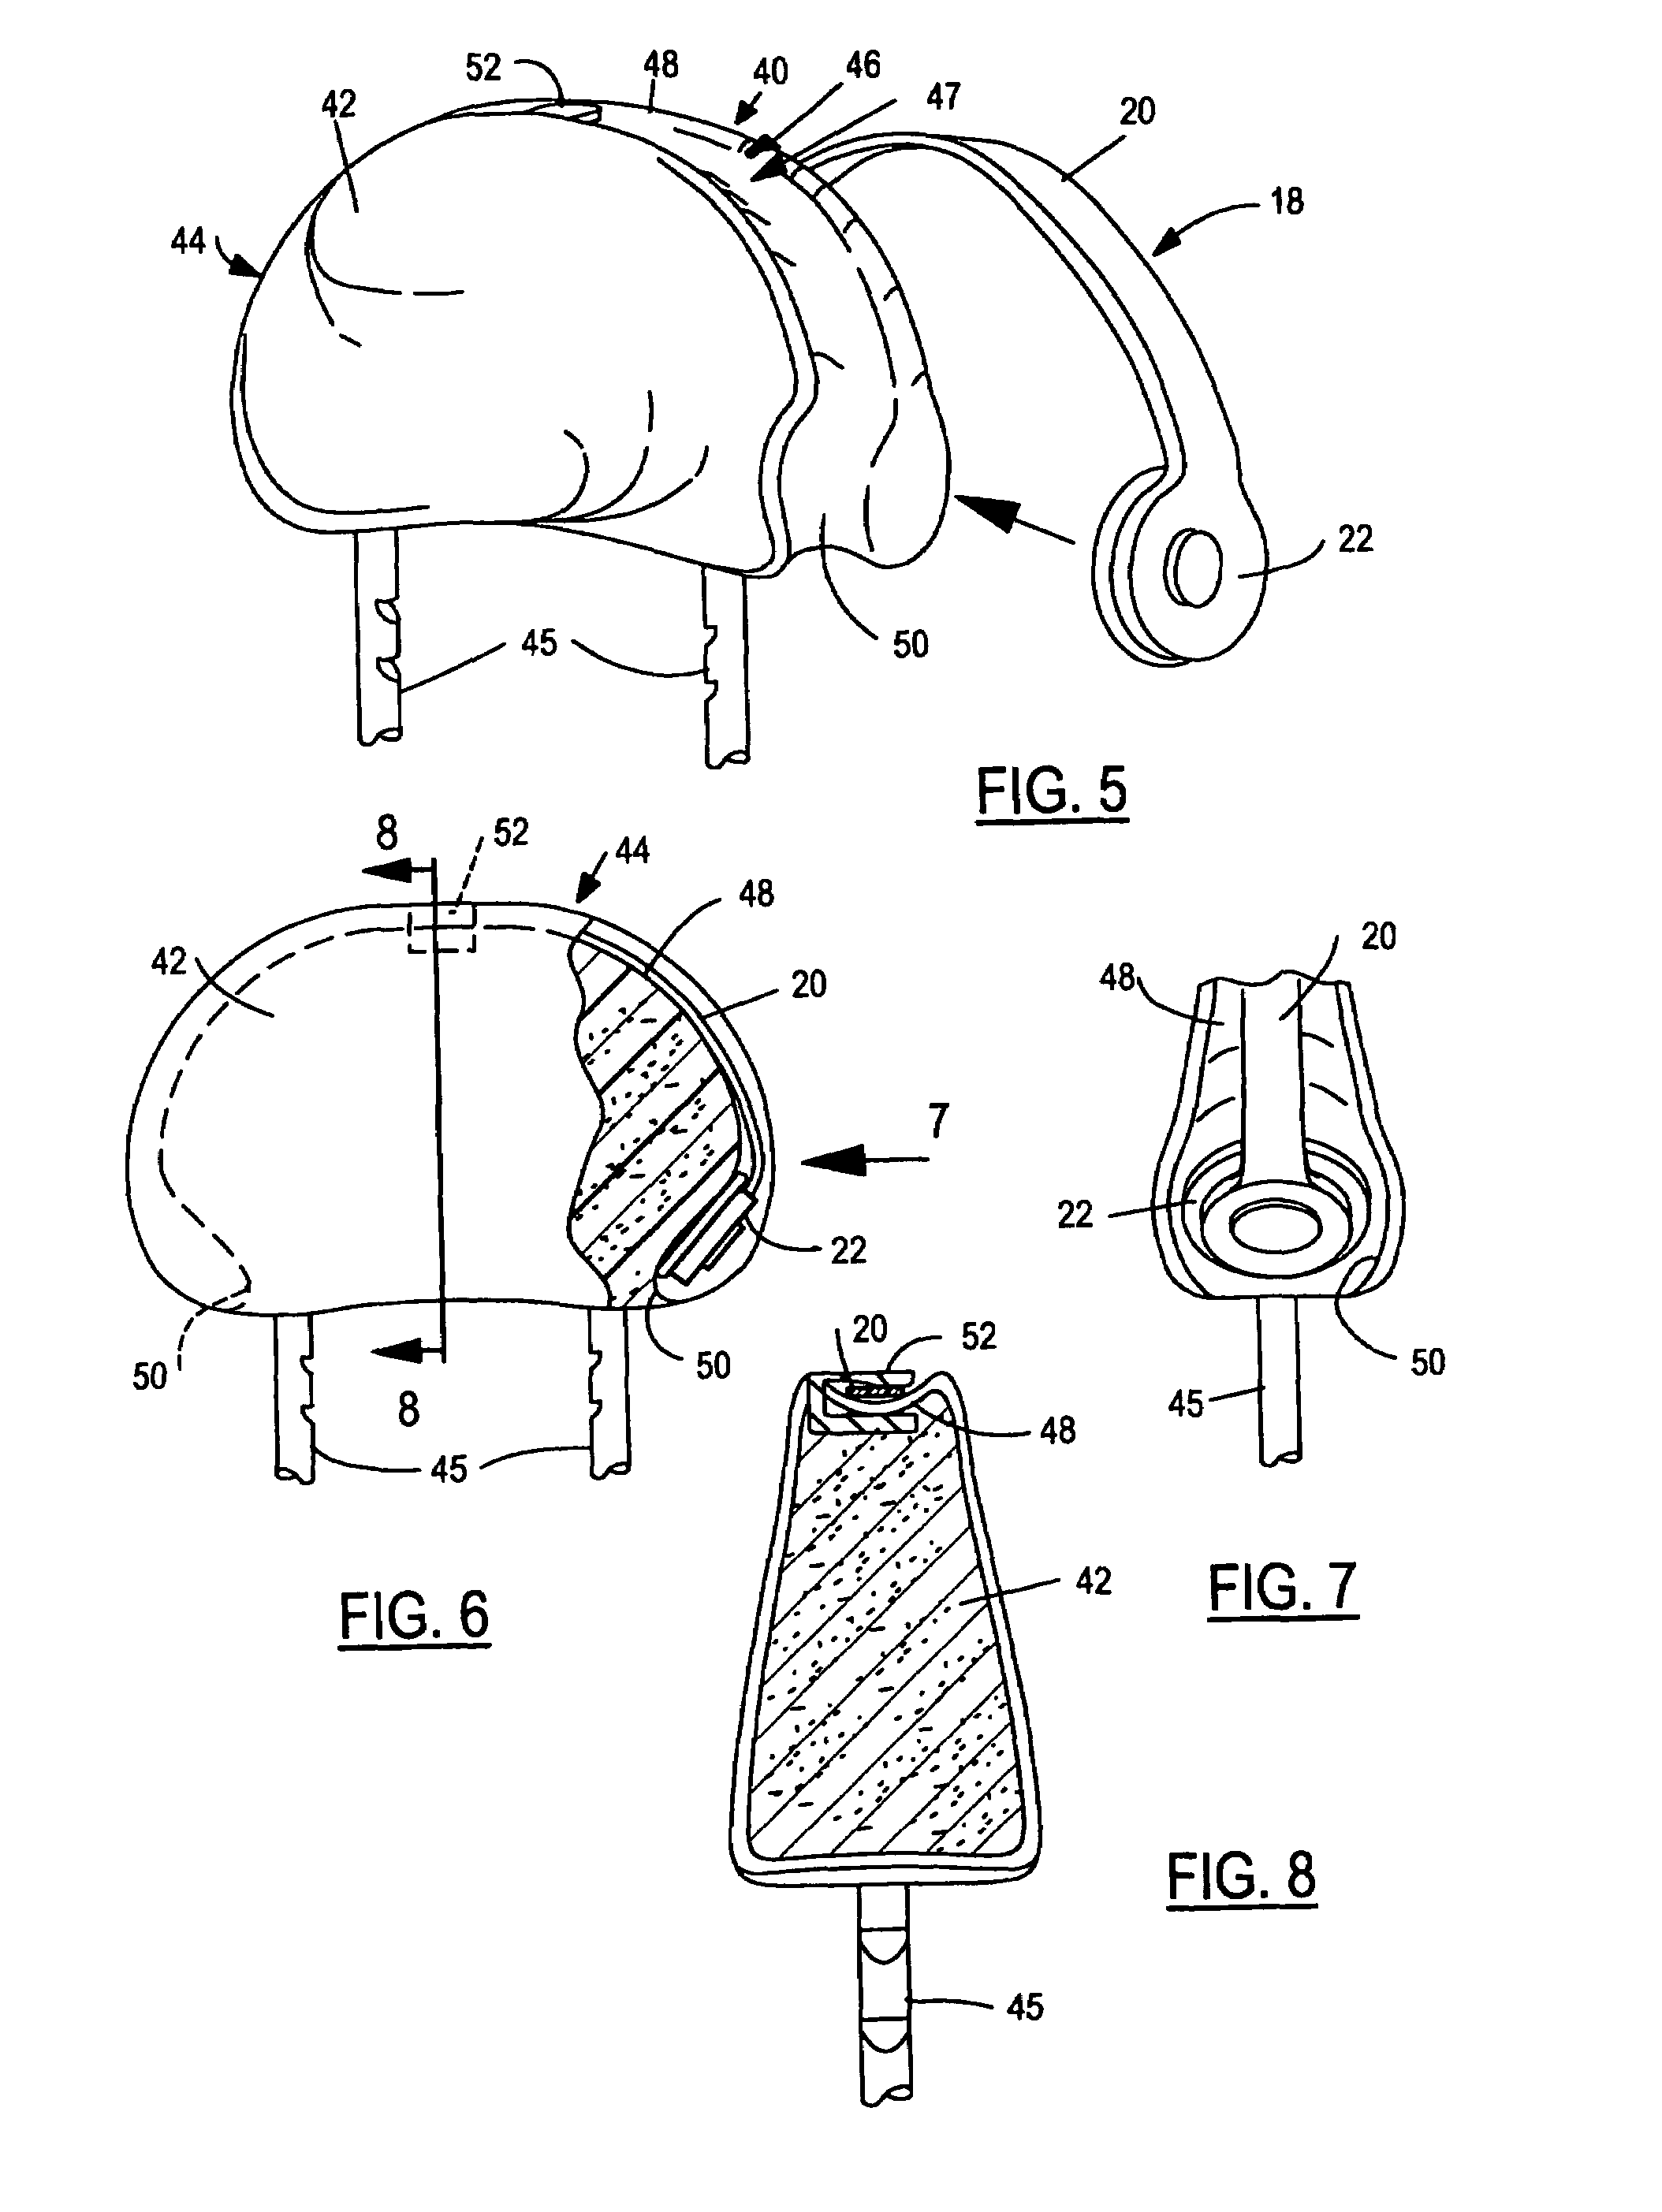 Vehicular packaging system for headphone devices